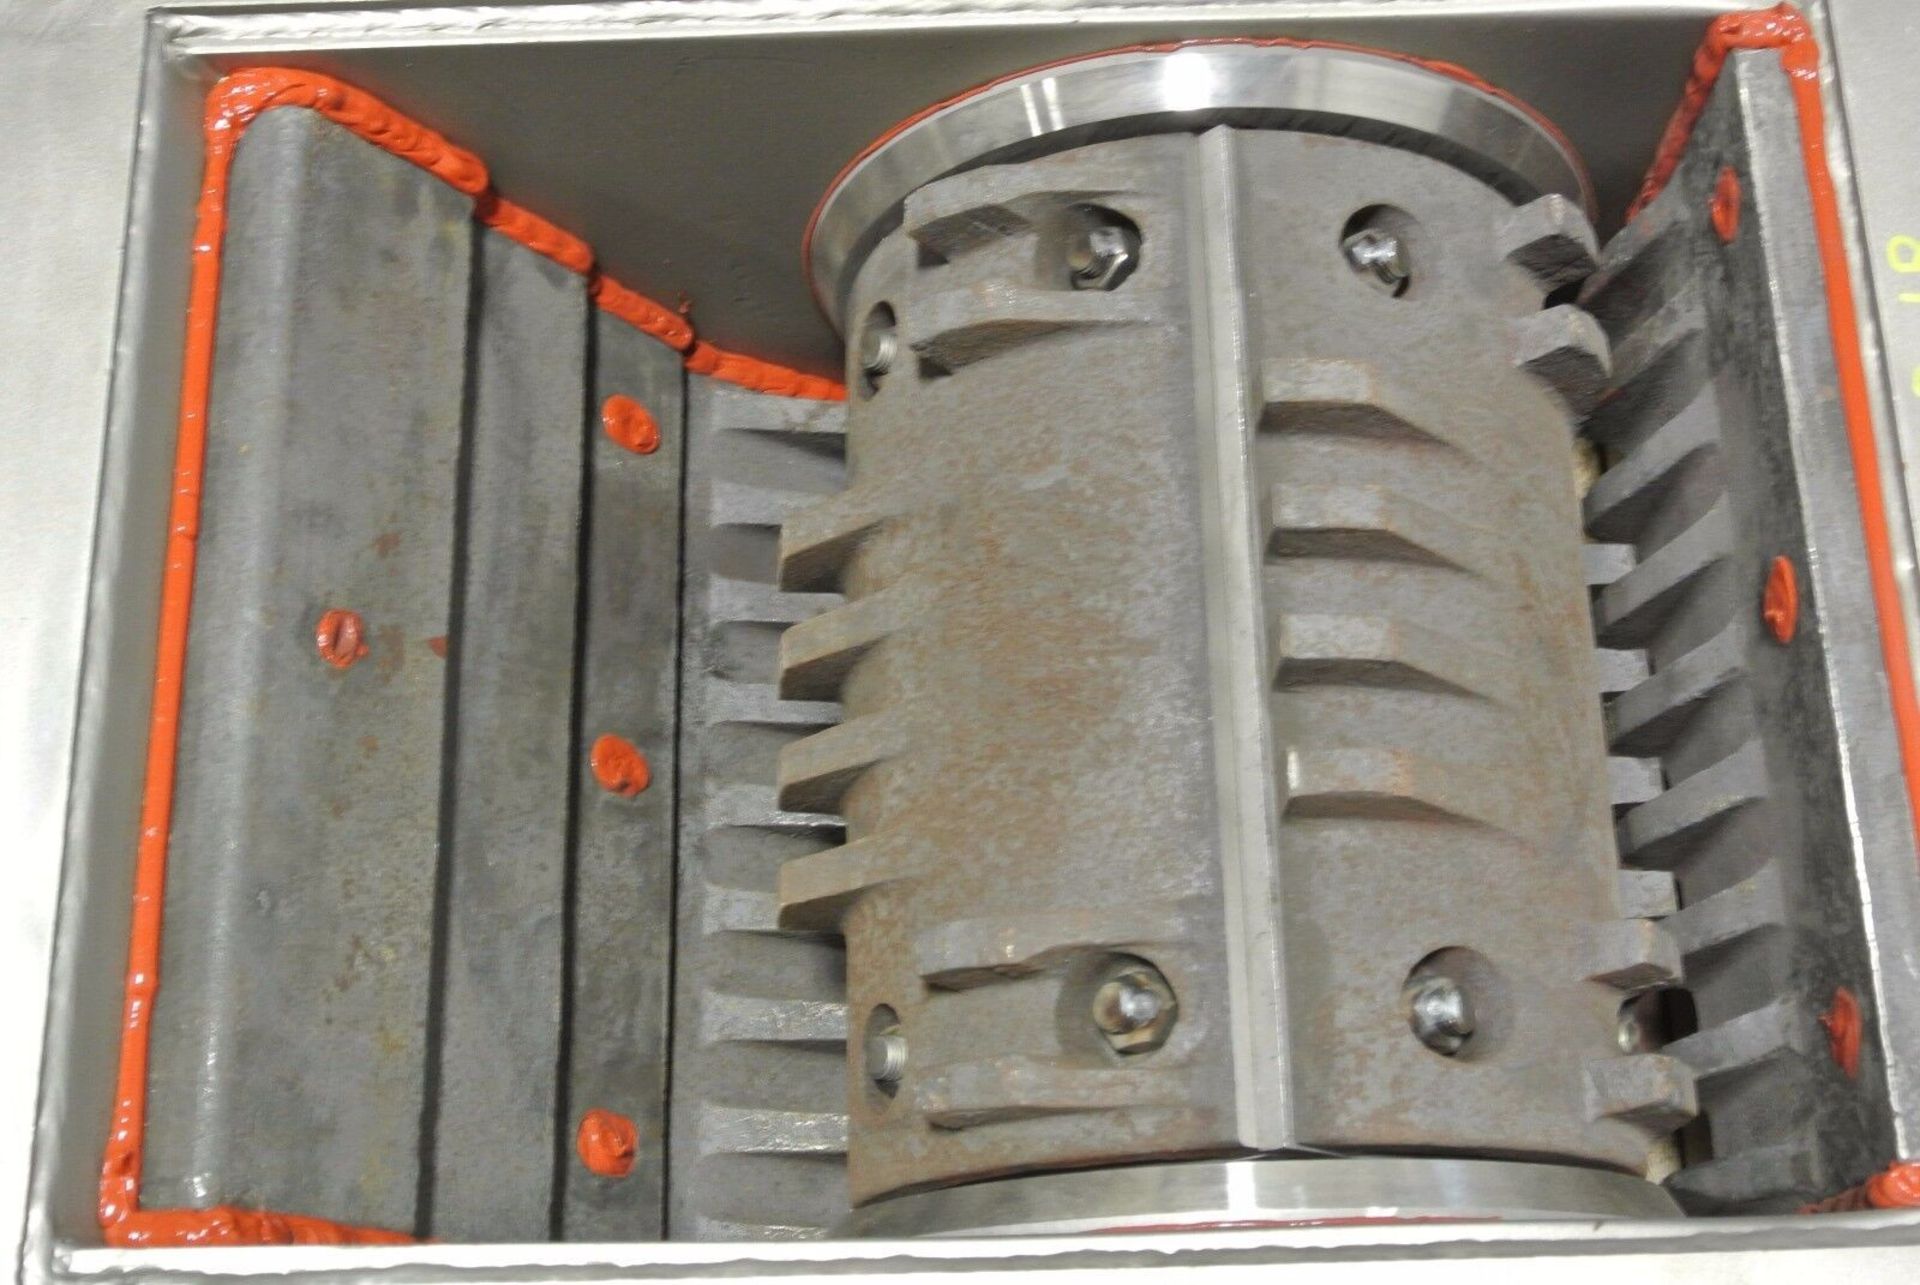 27" X 20 " UNITED CONVEYOR CRUSHER GRINDER MODEL 2102 (Located Springfield, NH) (Loading Fee $50) - Image 3 of 8